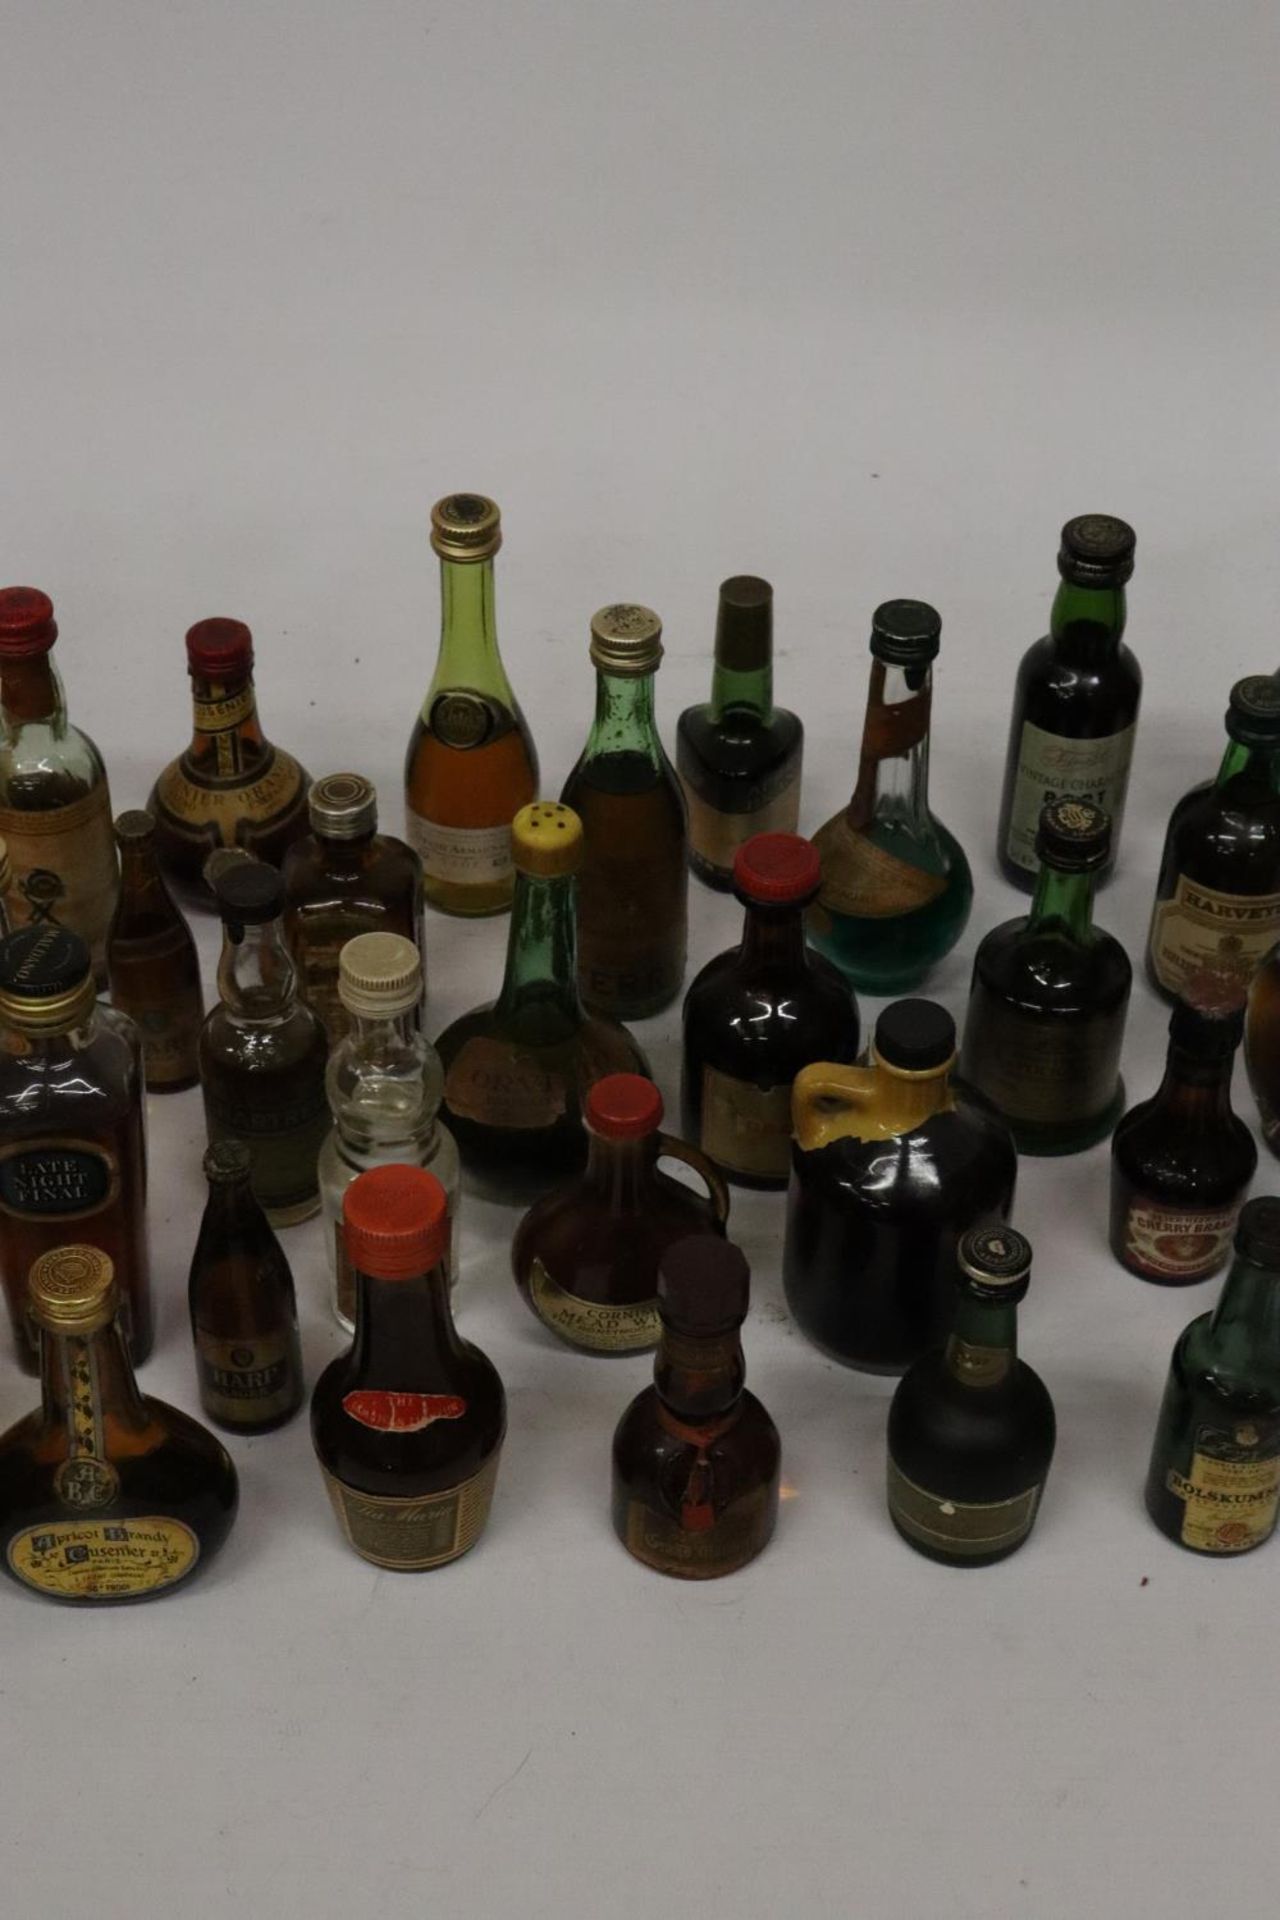 A LARGE QUANTITY OF MINIATURE BOTTLES OF ALCOHOL - Image 4 of 10